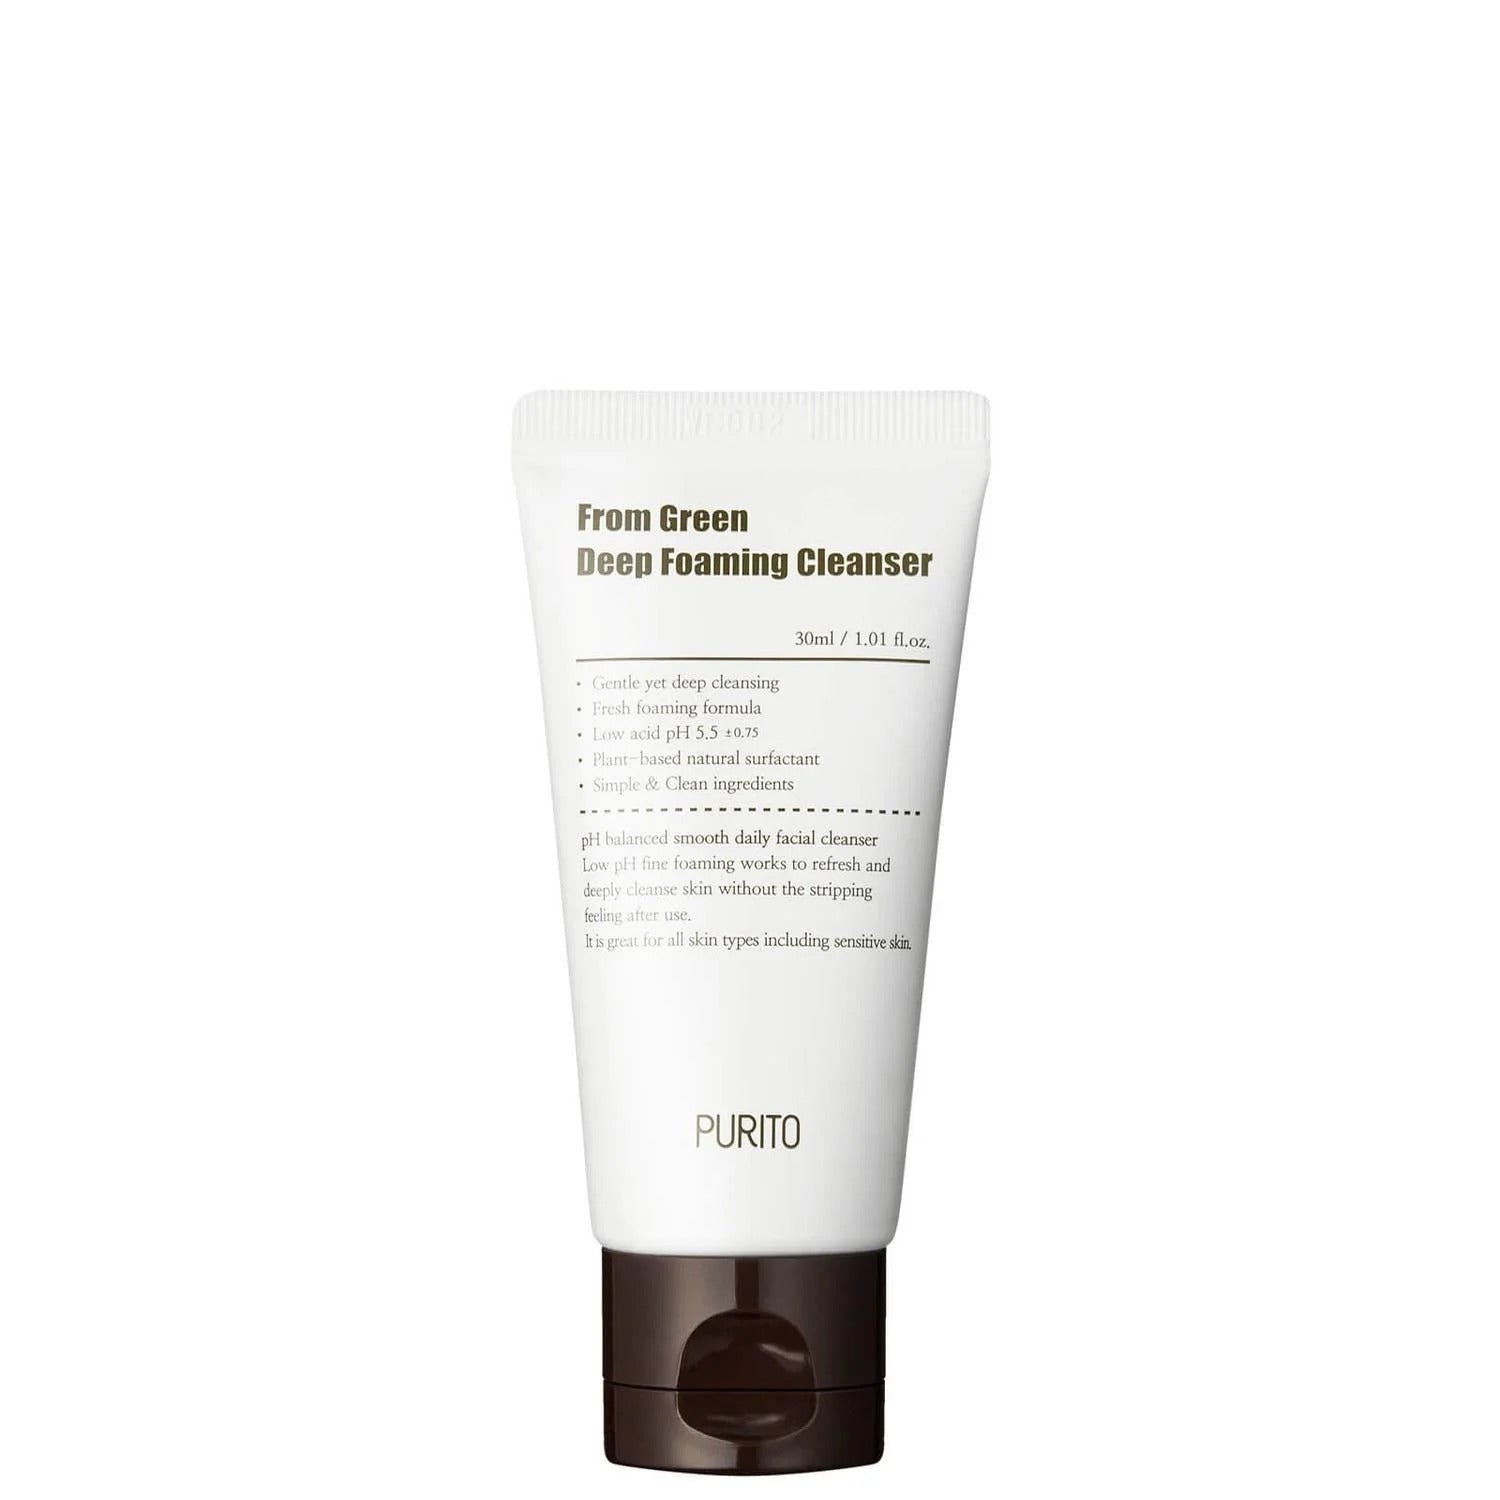 Purito From Green Deep Foaming Cleanser Beauty Purito Mini (30ml)  